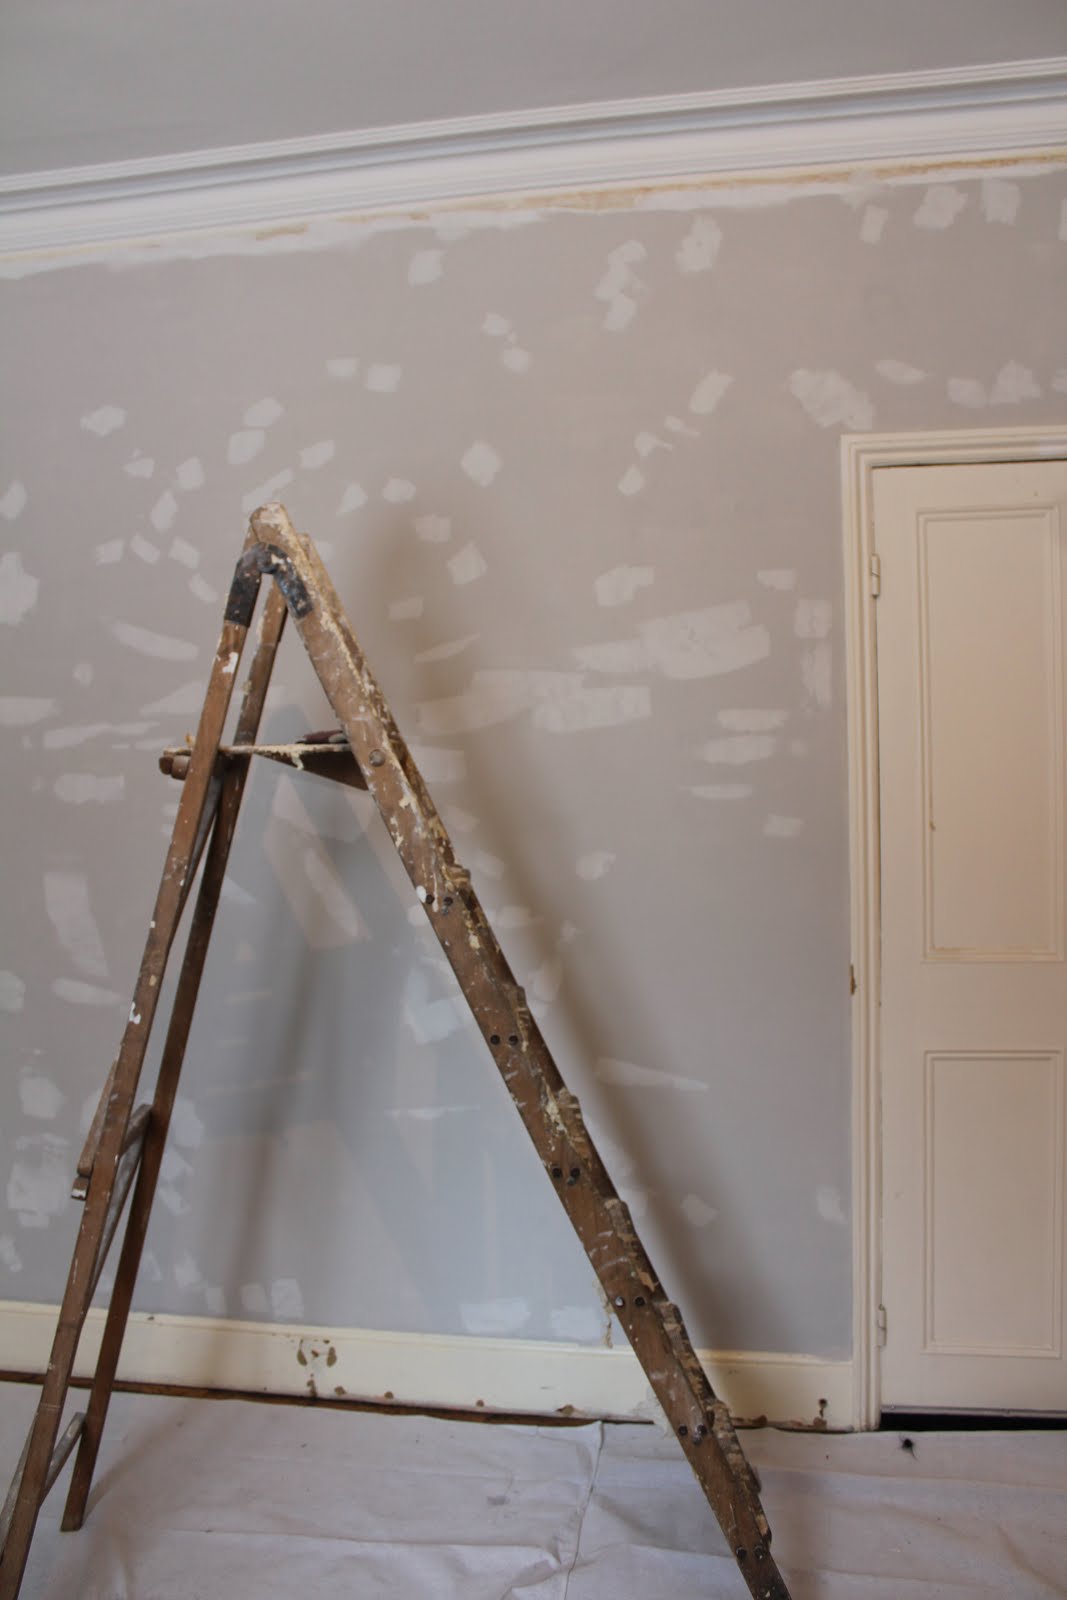 patching walls when decorating